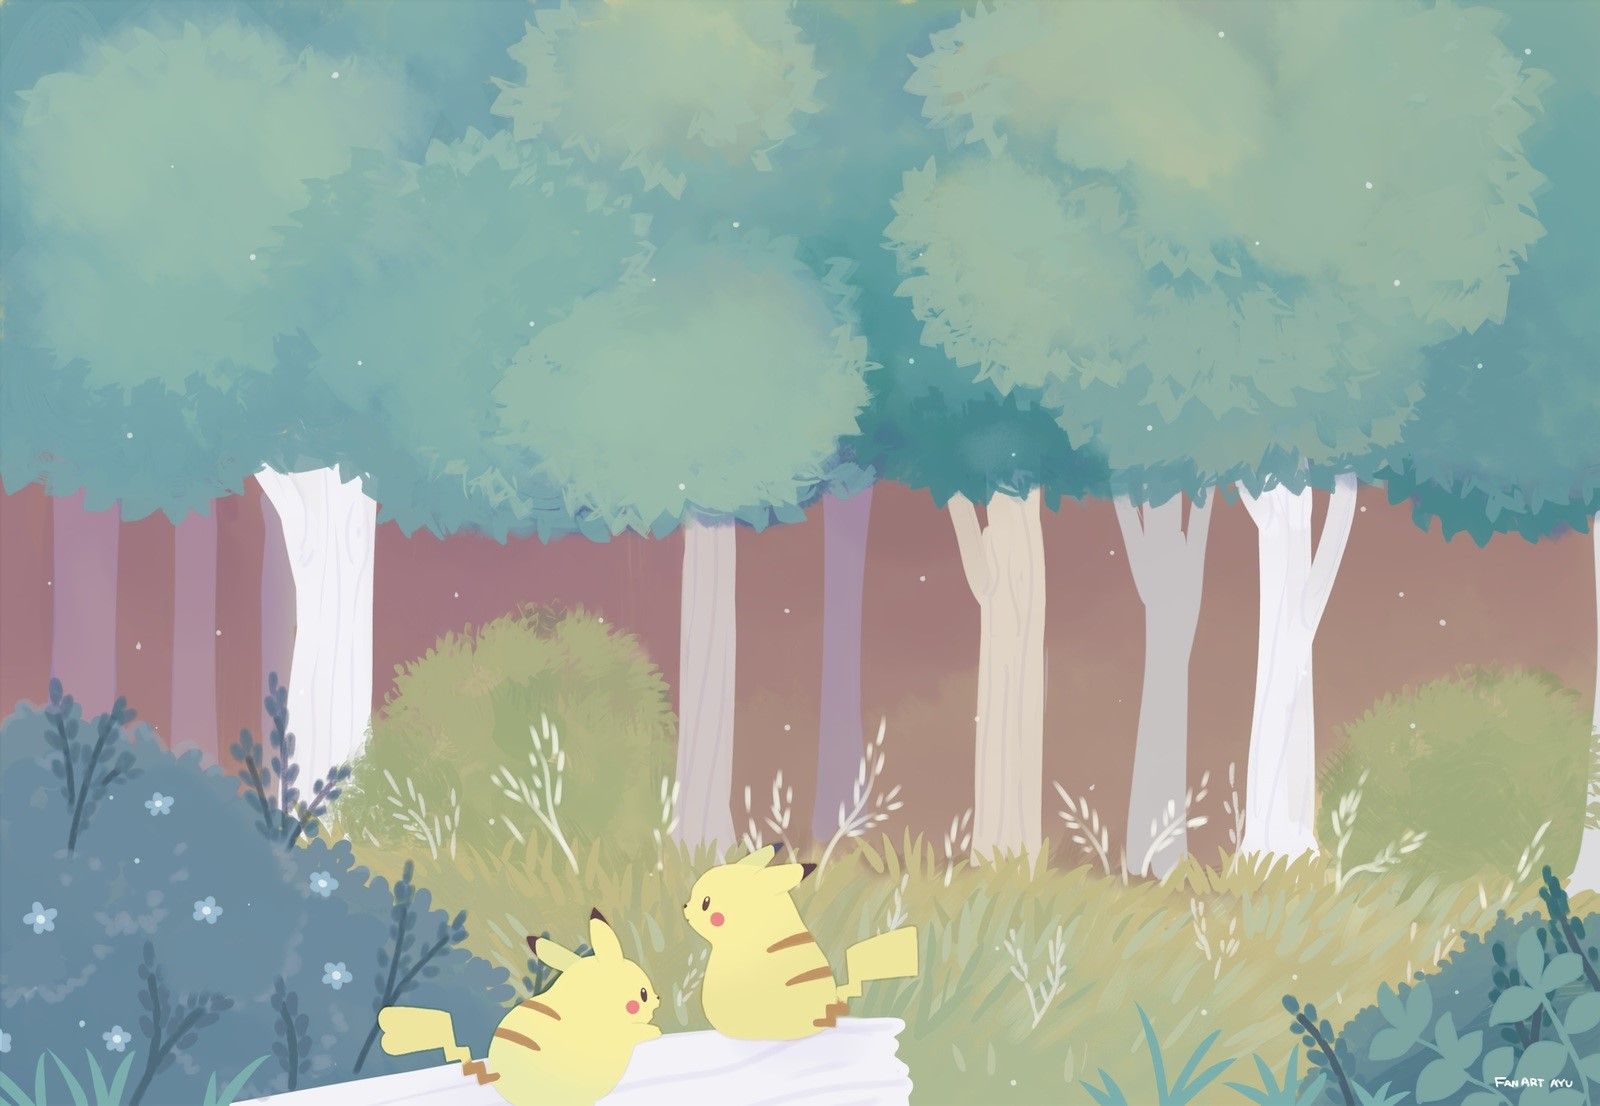 Two yellow pokemon sitting on a log in the woods - Pikachu